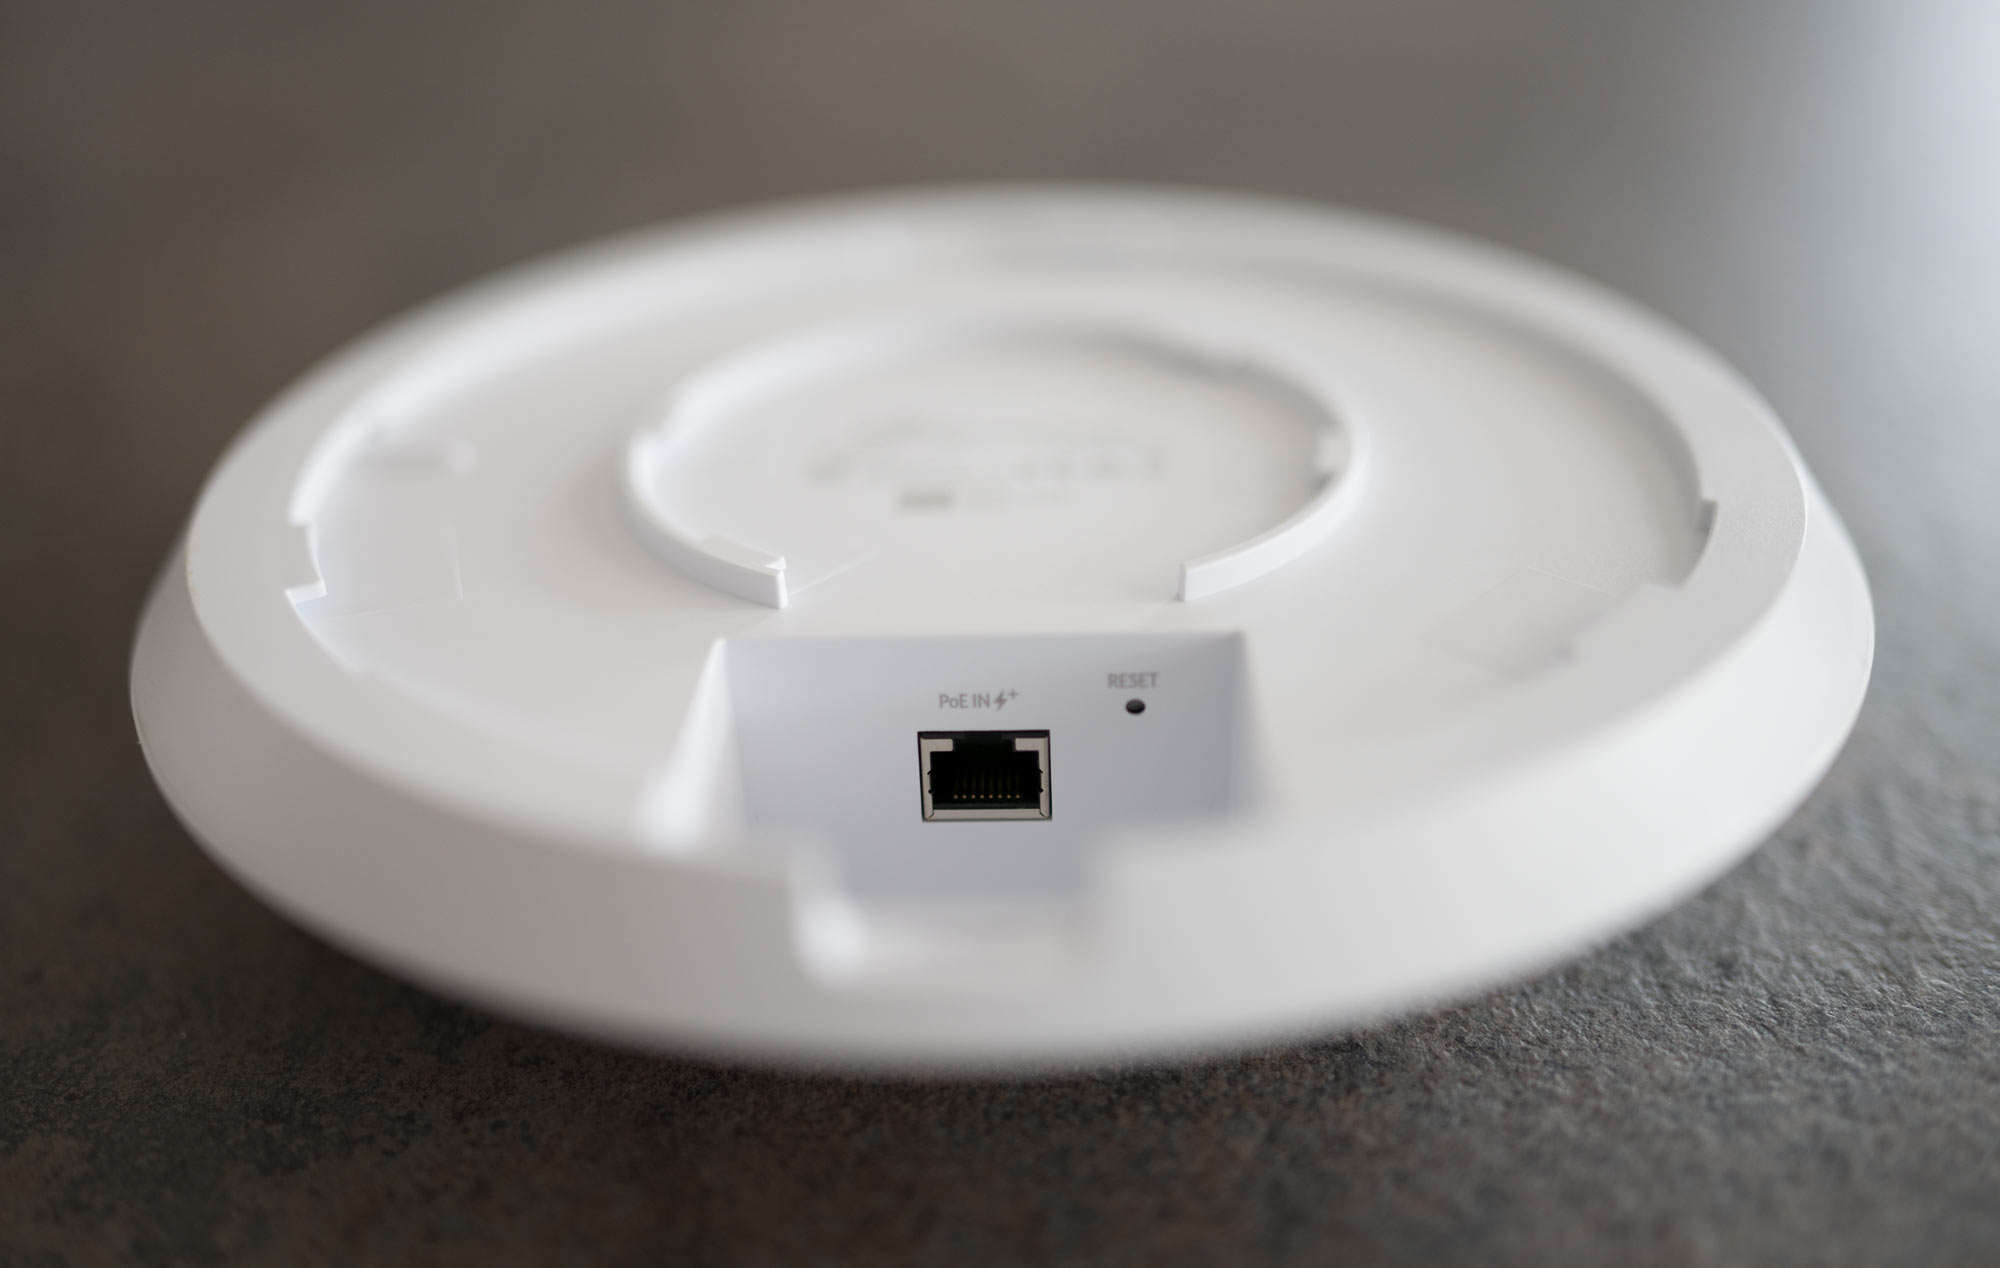 Ethernet connection on the UniFi 6 LR Access Point